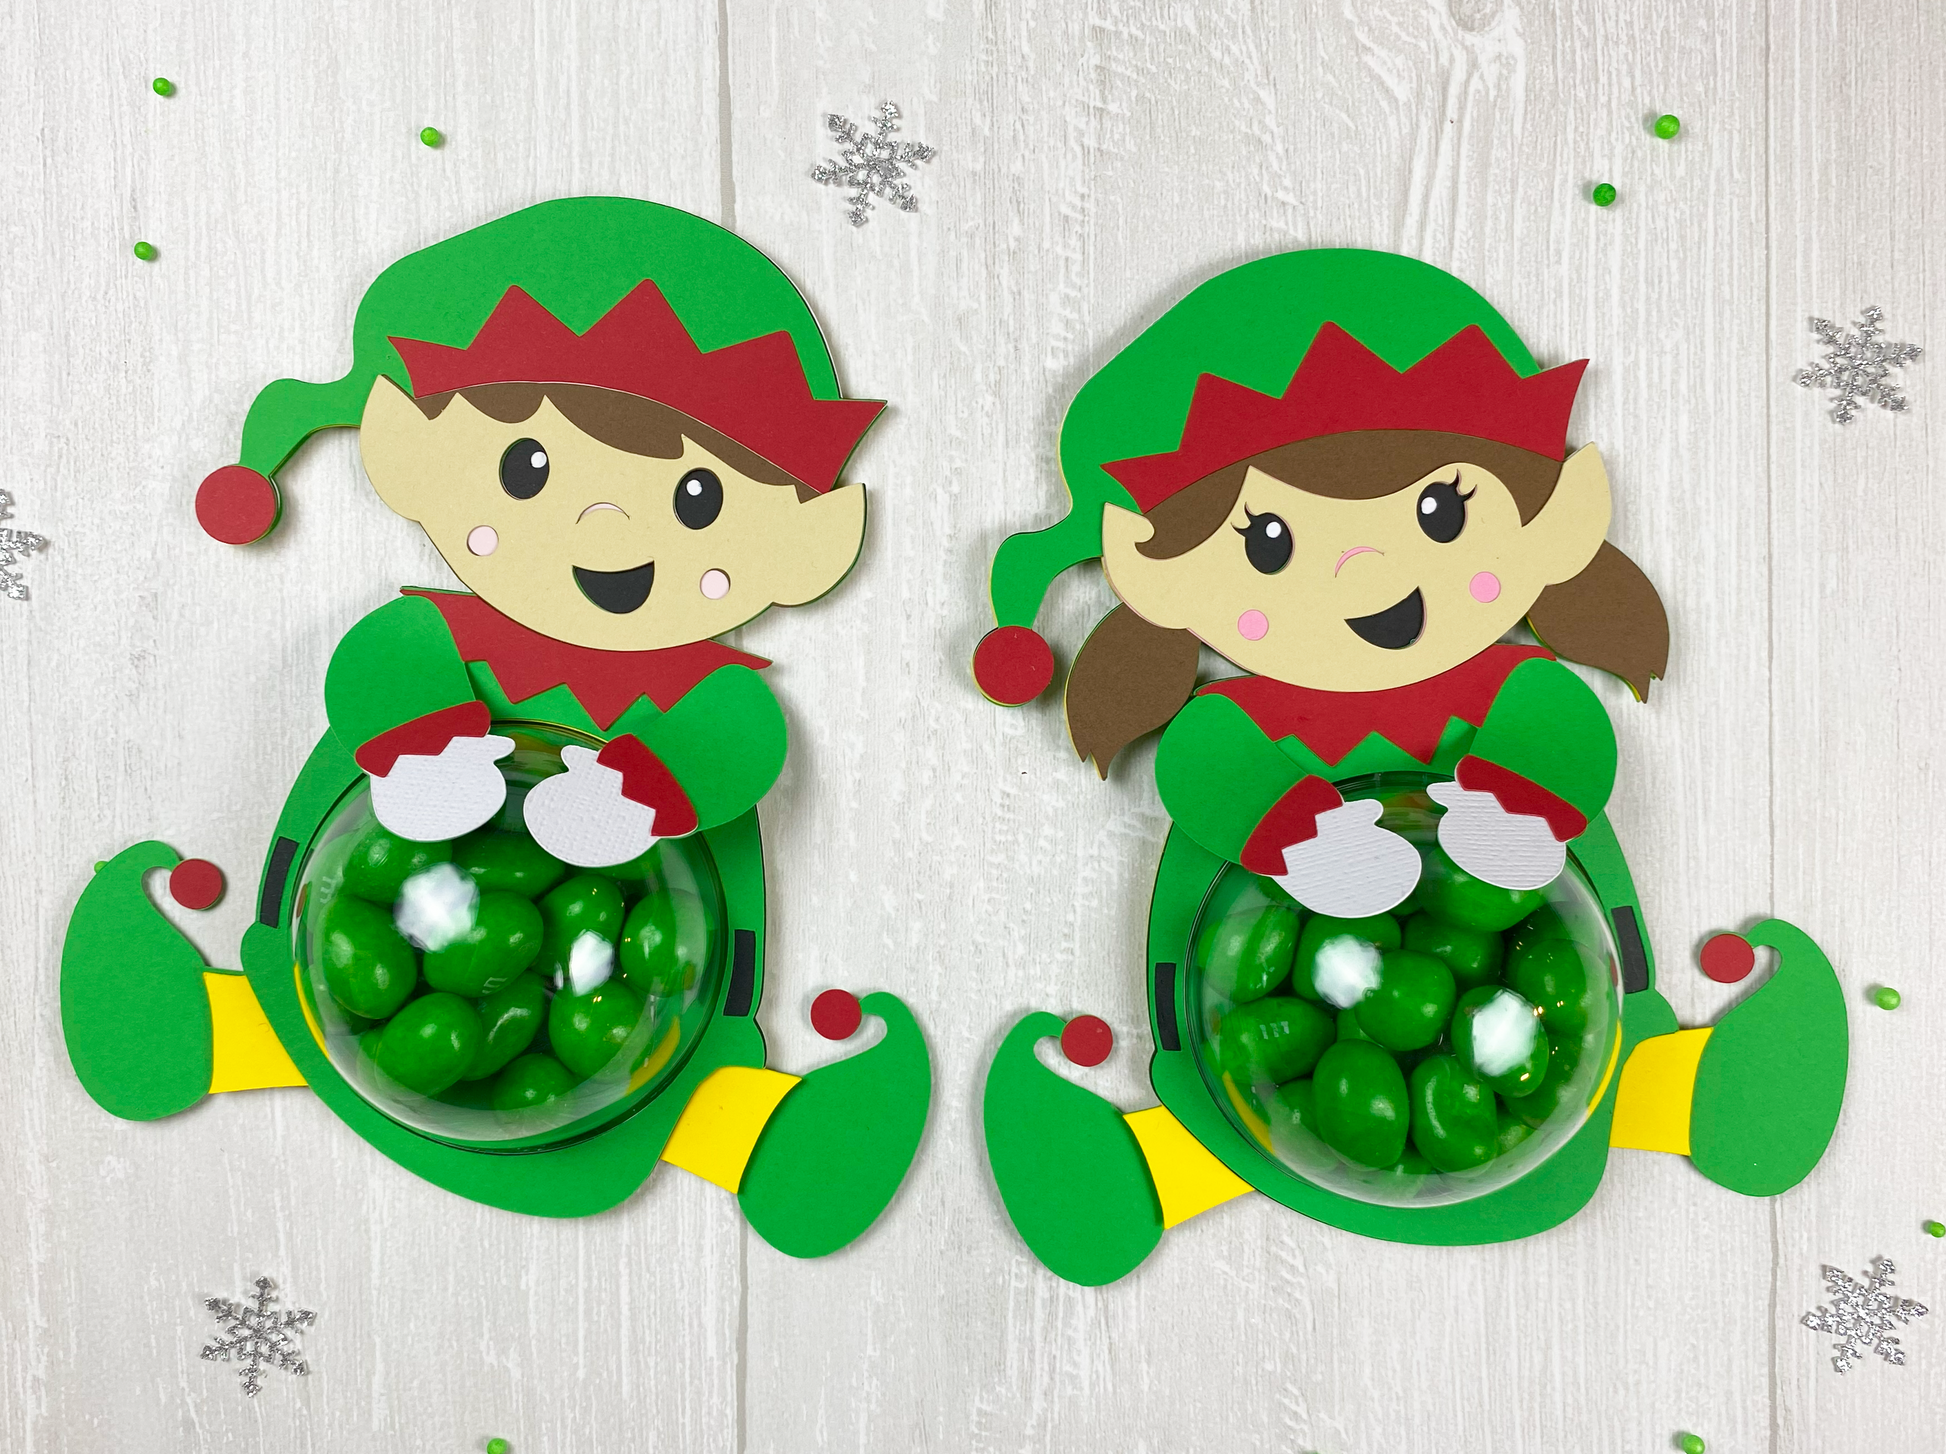 Boy and girl elf candy holders. Template for Cricut or Silhouette. Perfect stocking stuffers, holiday party favors or class gifts.